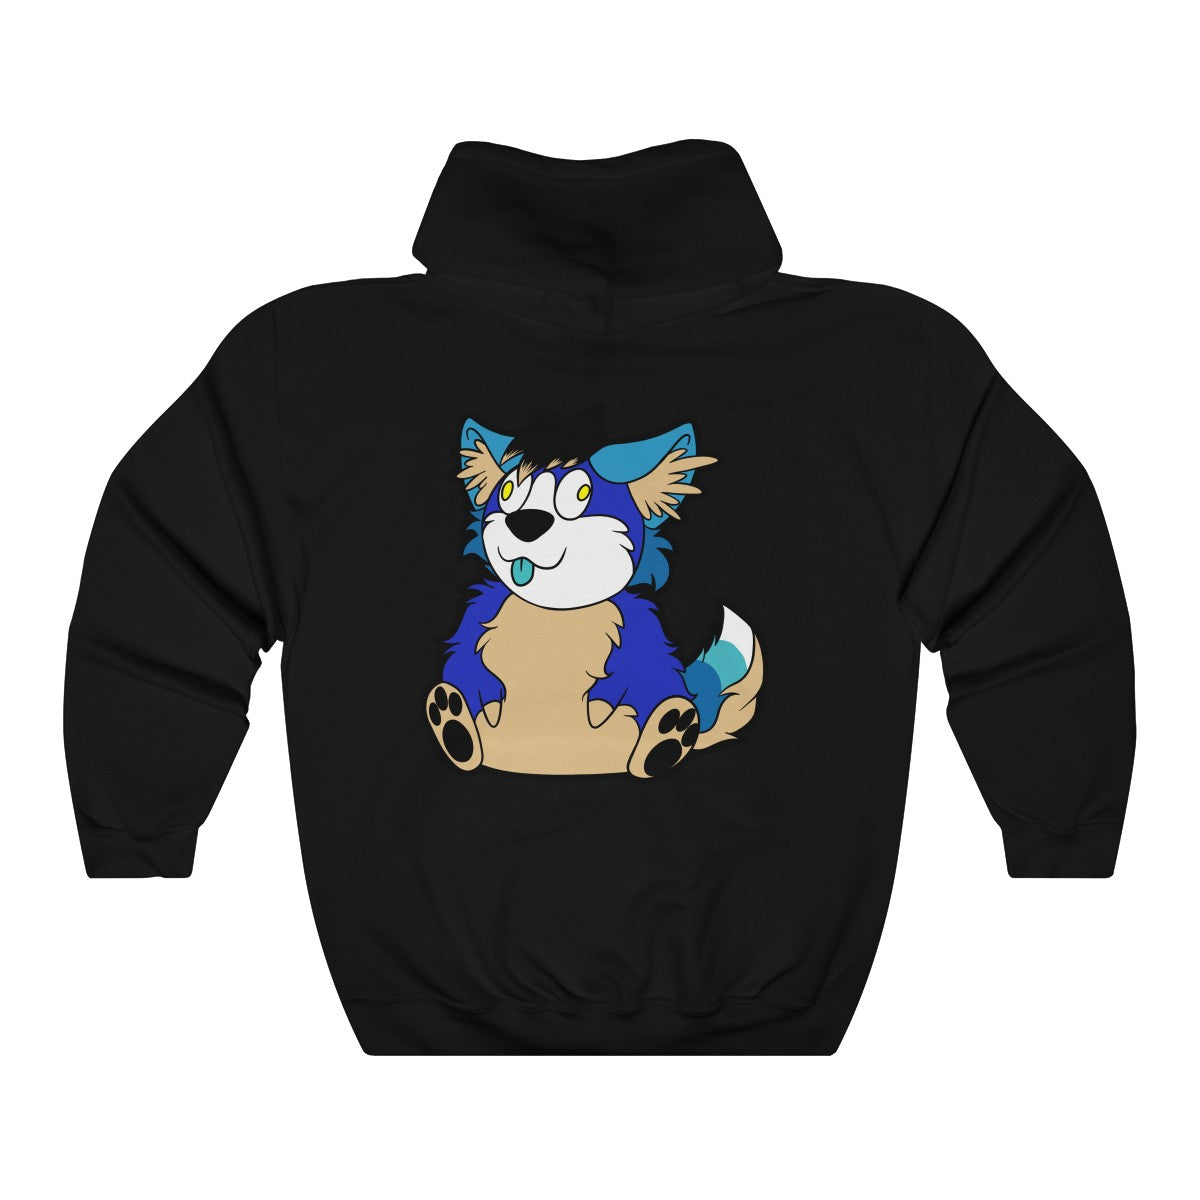 Thicc Boi No Text - Hoodie Hoodie AFLT-Hund The Hound Black S 